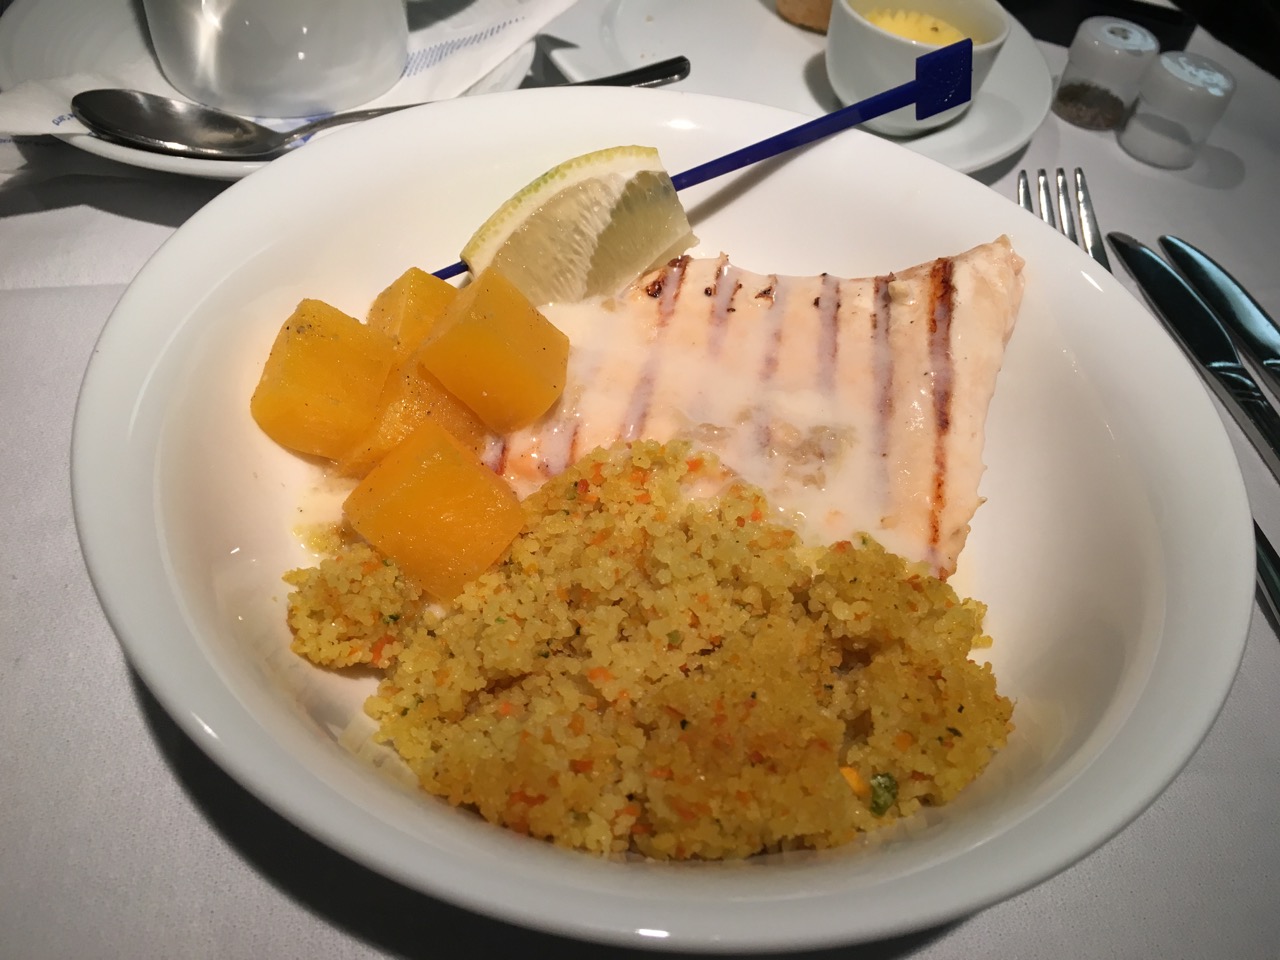 Fillet of Salmon - Creamy ginger sauce, vegetable couscous and roasted pumpkin with cardamom